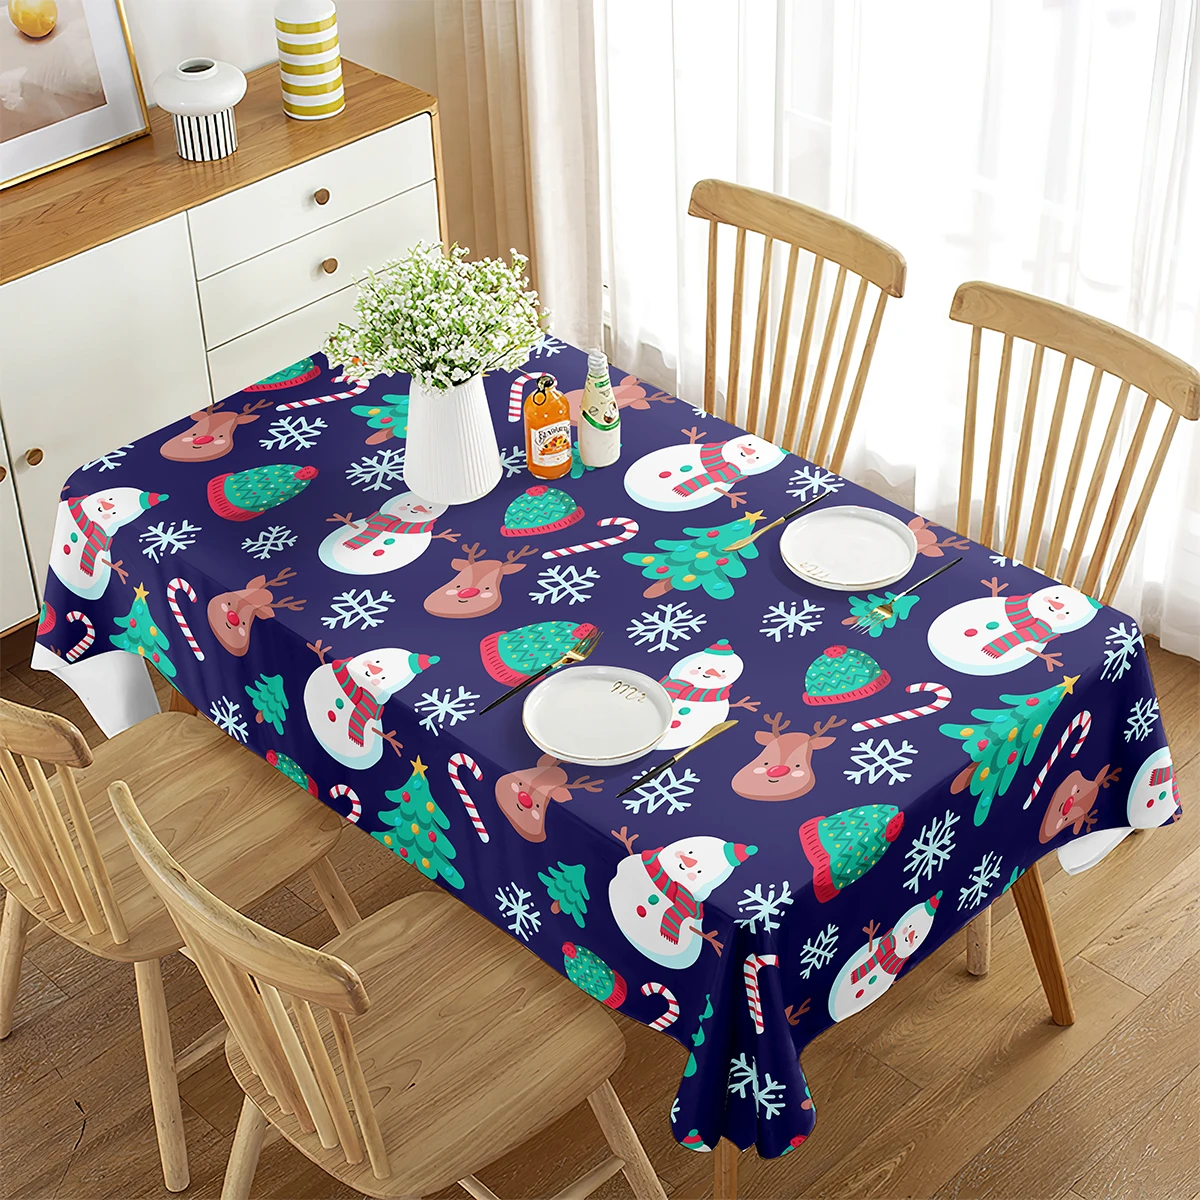 

Snowman Scarf Pattern Tablecloth Winter Christmas Theme Rectangle Table Cover for Kitchen Dining Room Table Party Decoration